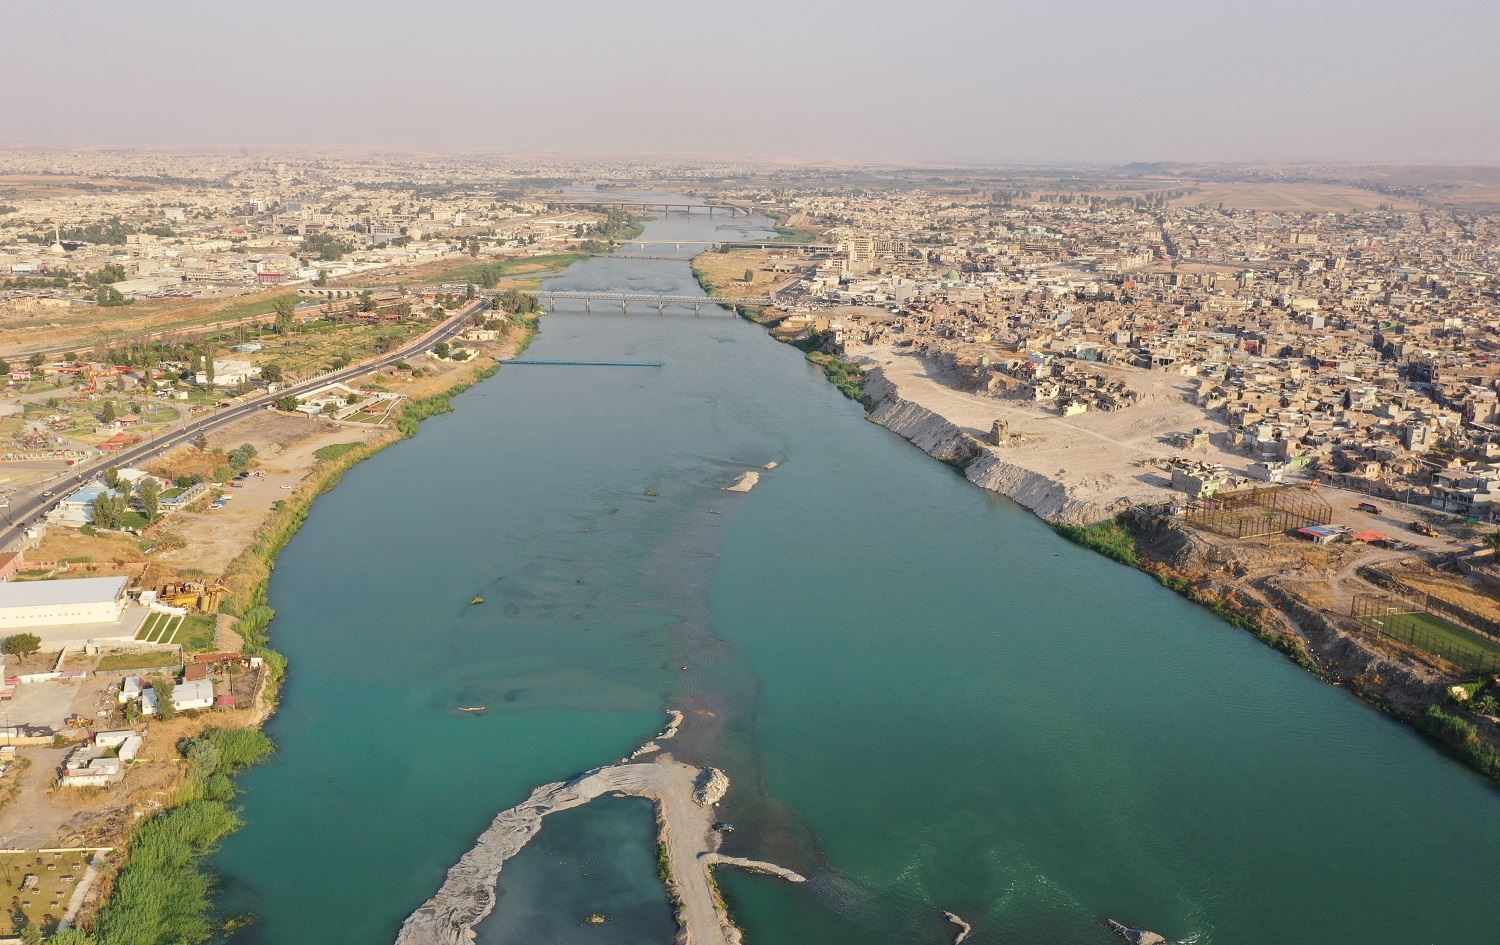 Tigris, Euphrates water levels drop more than 50%: Iraqi water ministry